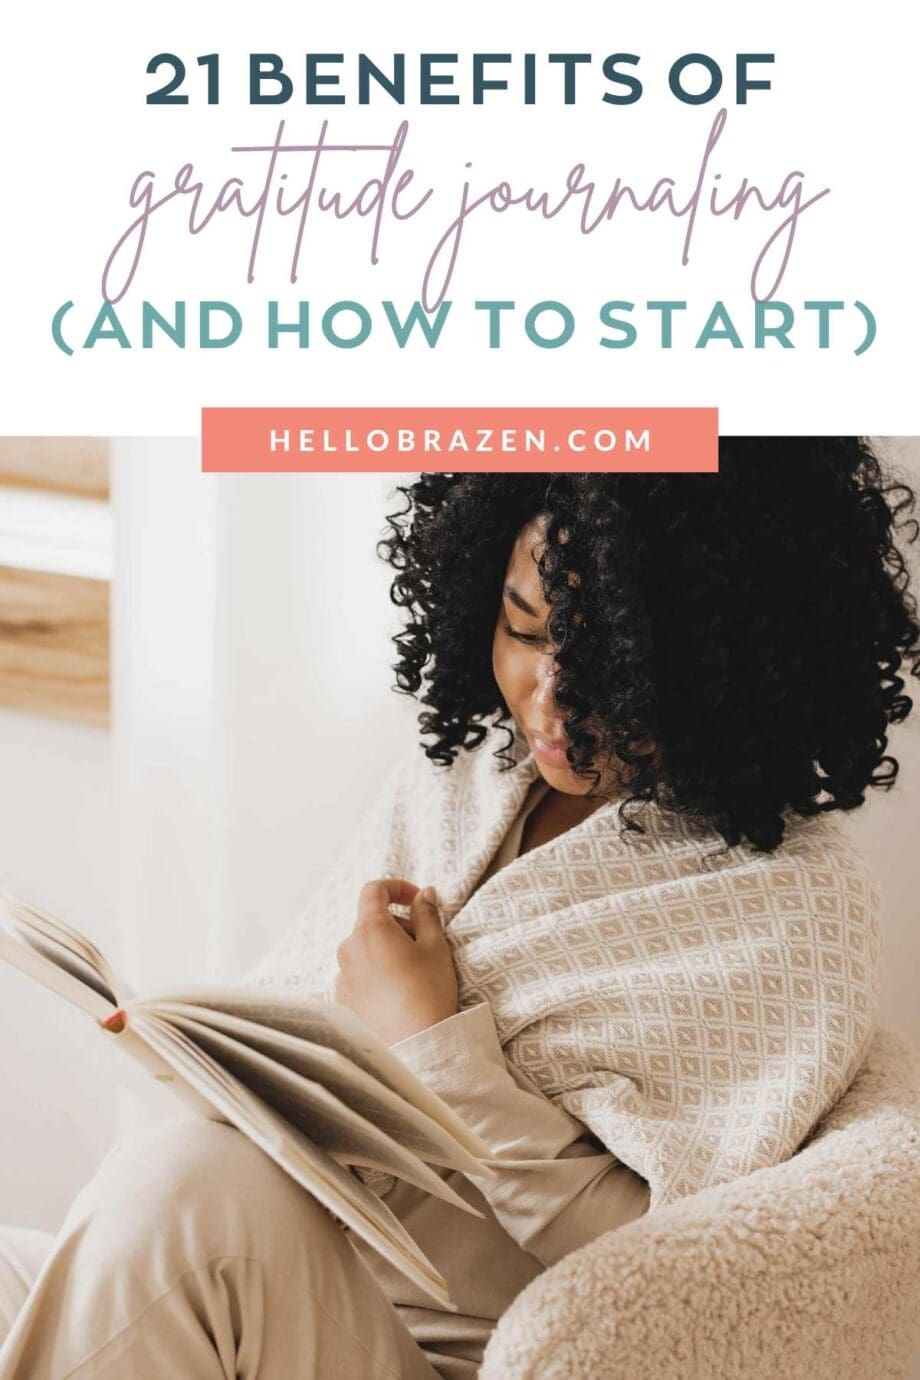 Studies have shown that gratitude journaling can lead to increased feelings of well-being, increased resilience in the face of stress, and even improved physical health. Here are 21 benefits of gratitude journaling and how to get started.